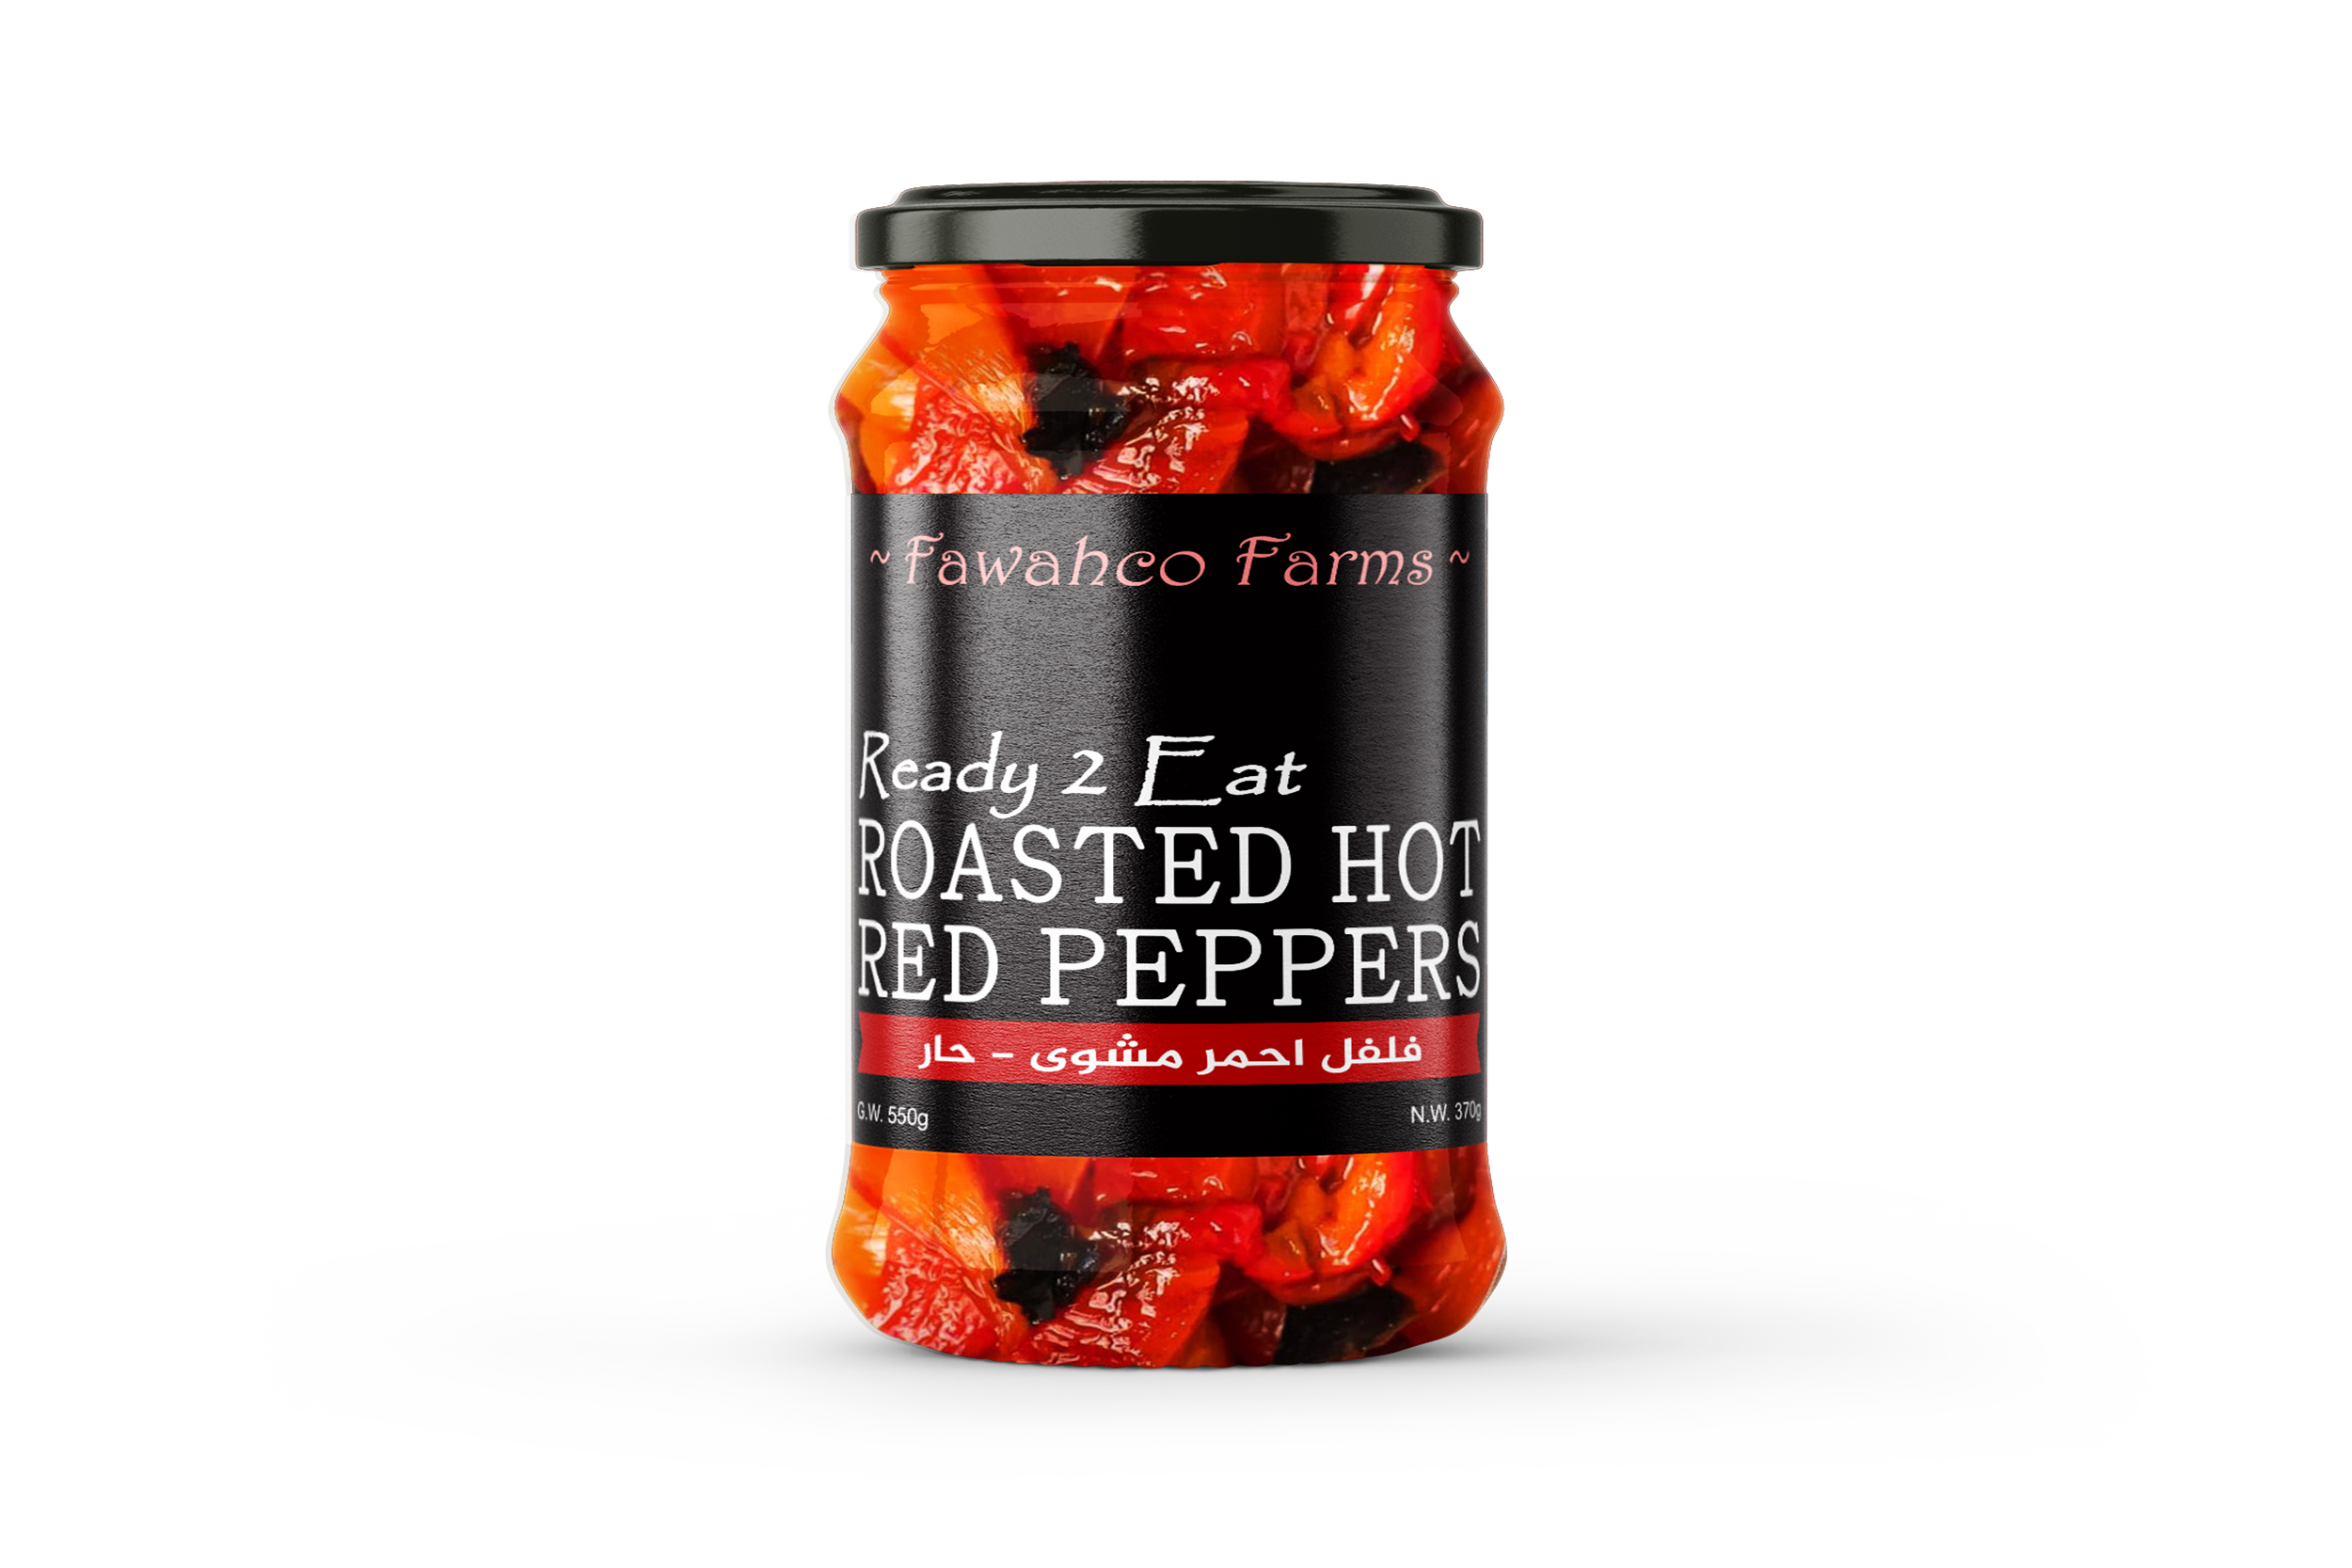 Roasted Hot Red Peppers